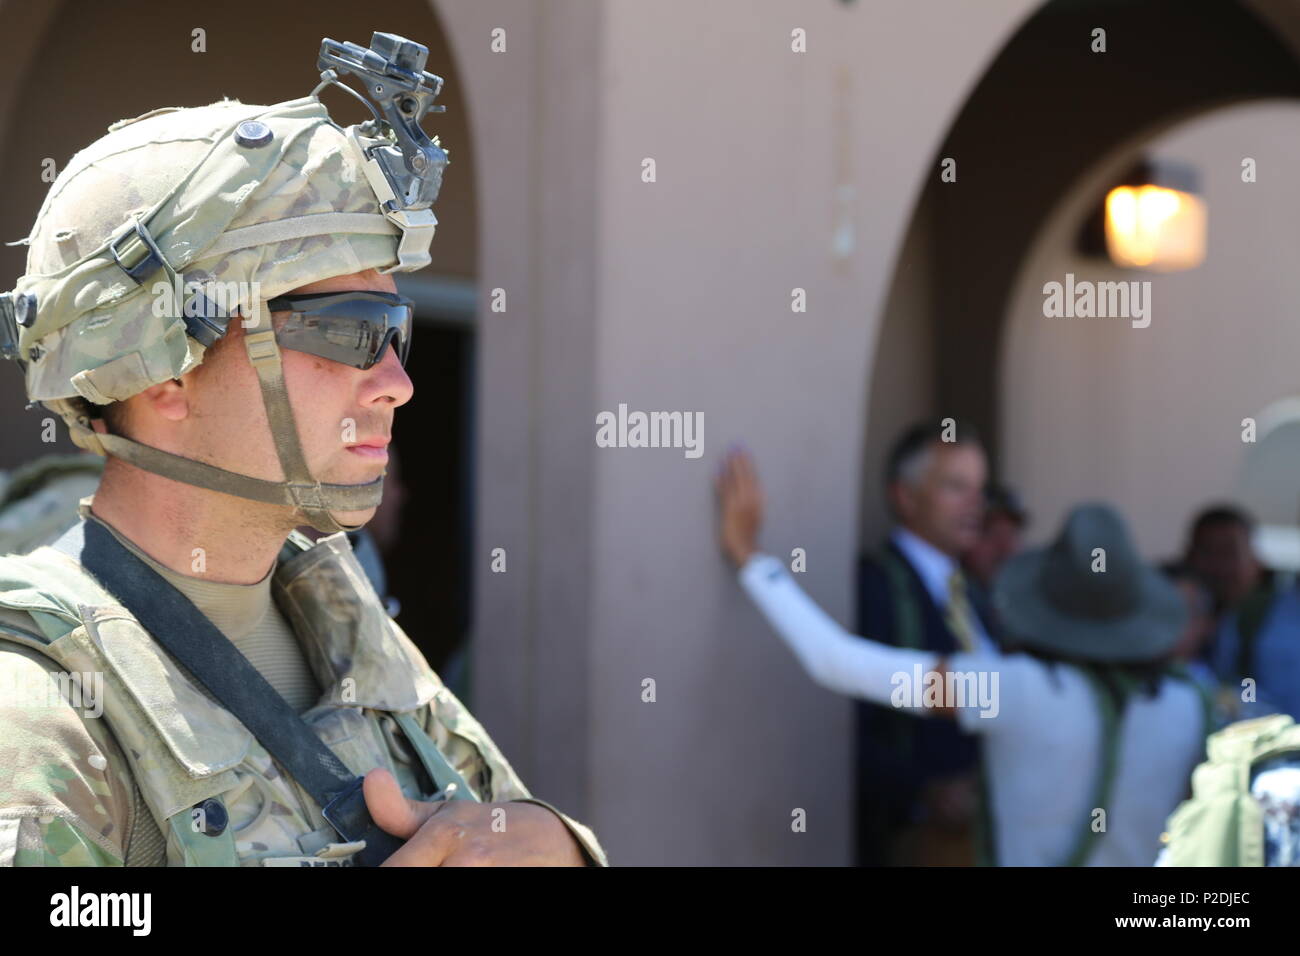 A U.S. Army Soldier assigned to 3rd Brigade Combat Team, 4th Infantry Division, stands before a press conference during Decisive Action Rotation 16-09 at the National Training Center in Fort Irwin, Calif., Sept. 4, 2016. (U.S. Army photo by Staff Sgt. Shawnon Lott, Operations Group, National Training Center) Stock Photo